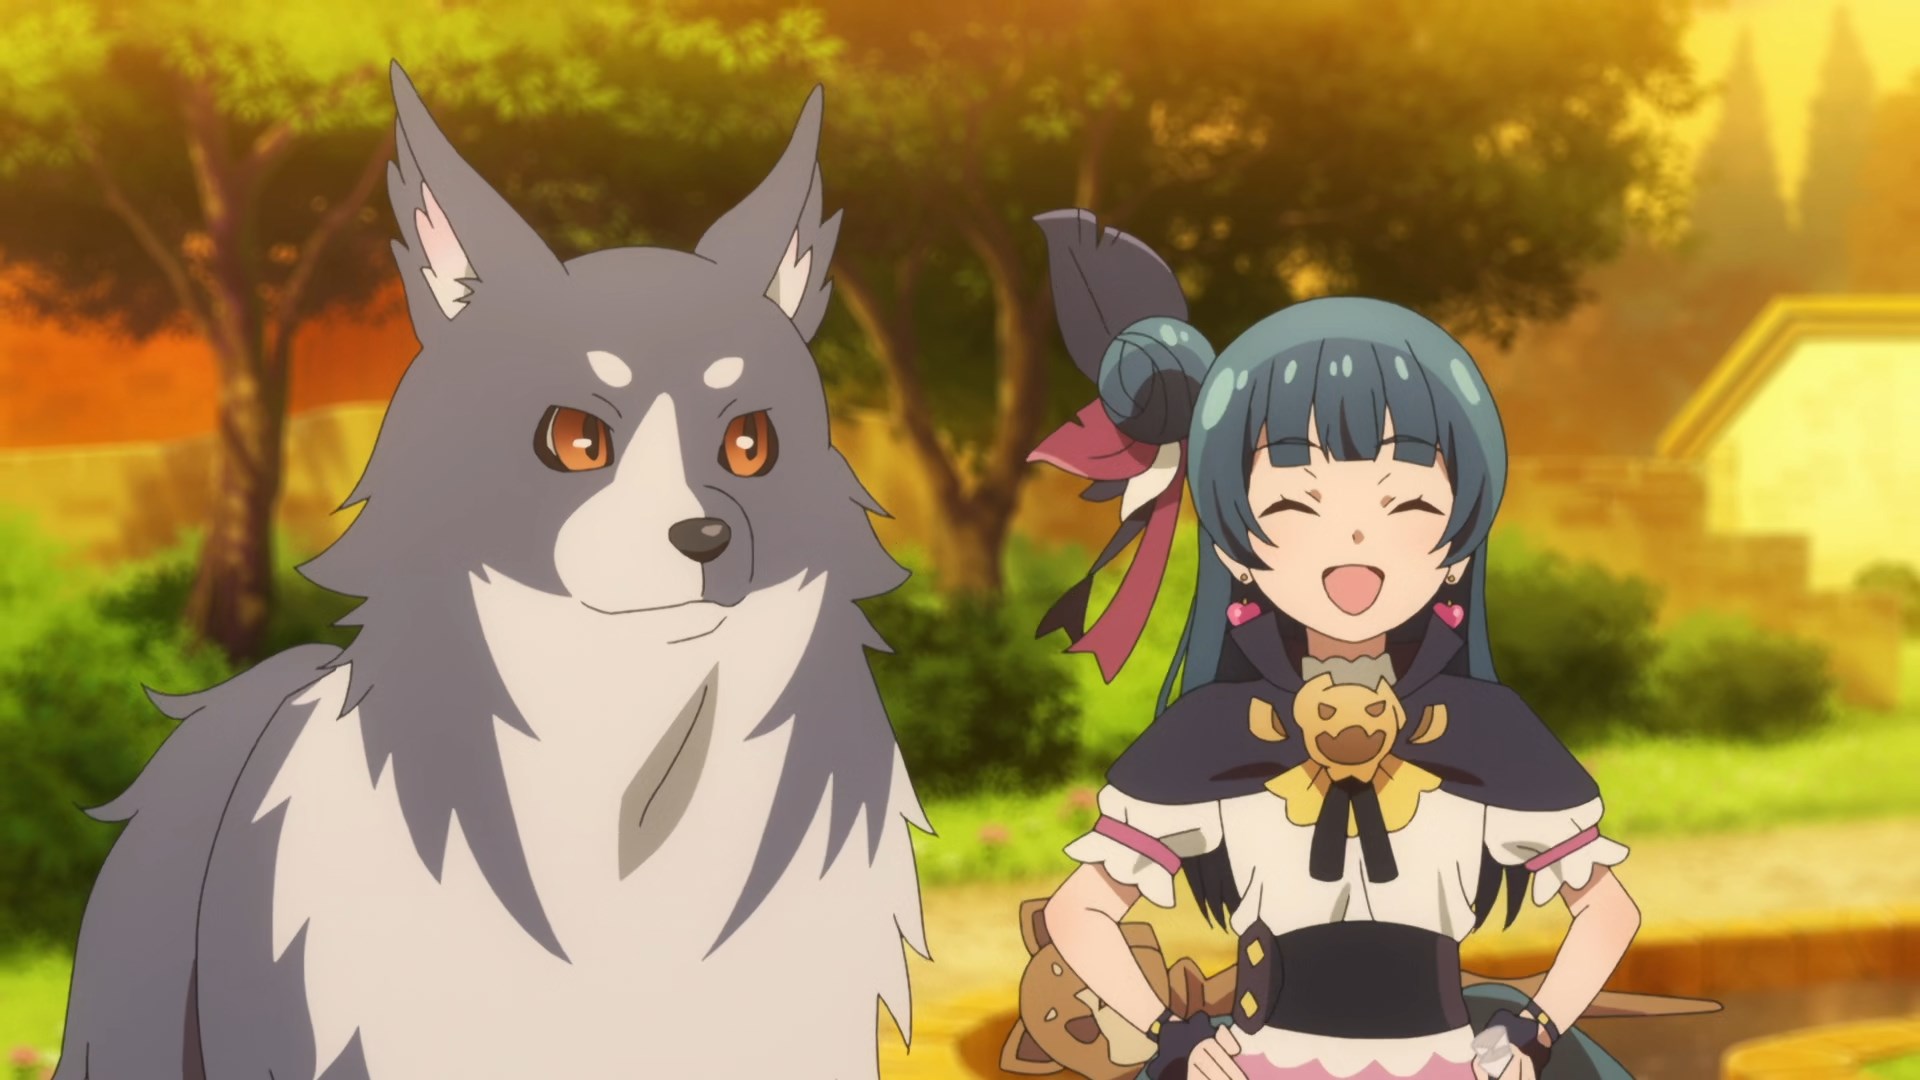 Yohane laughing and proud with her big dog sister next to her side